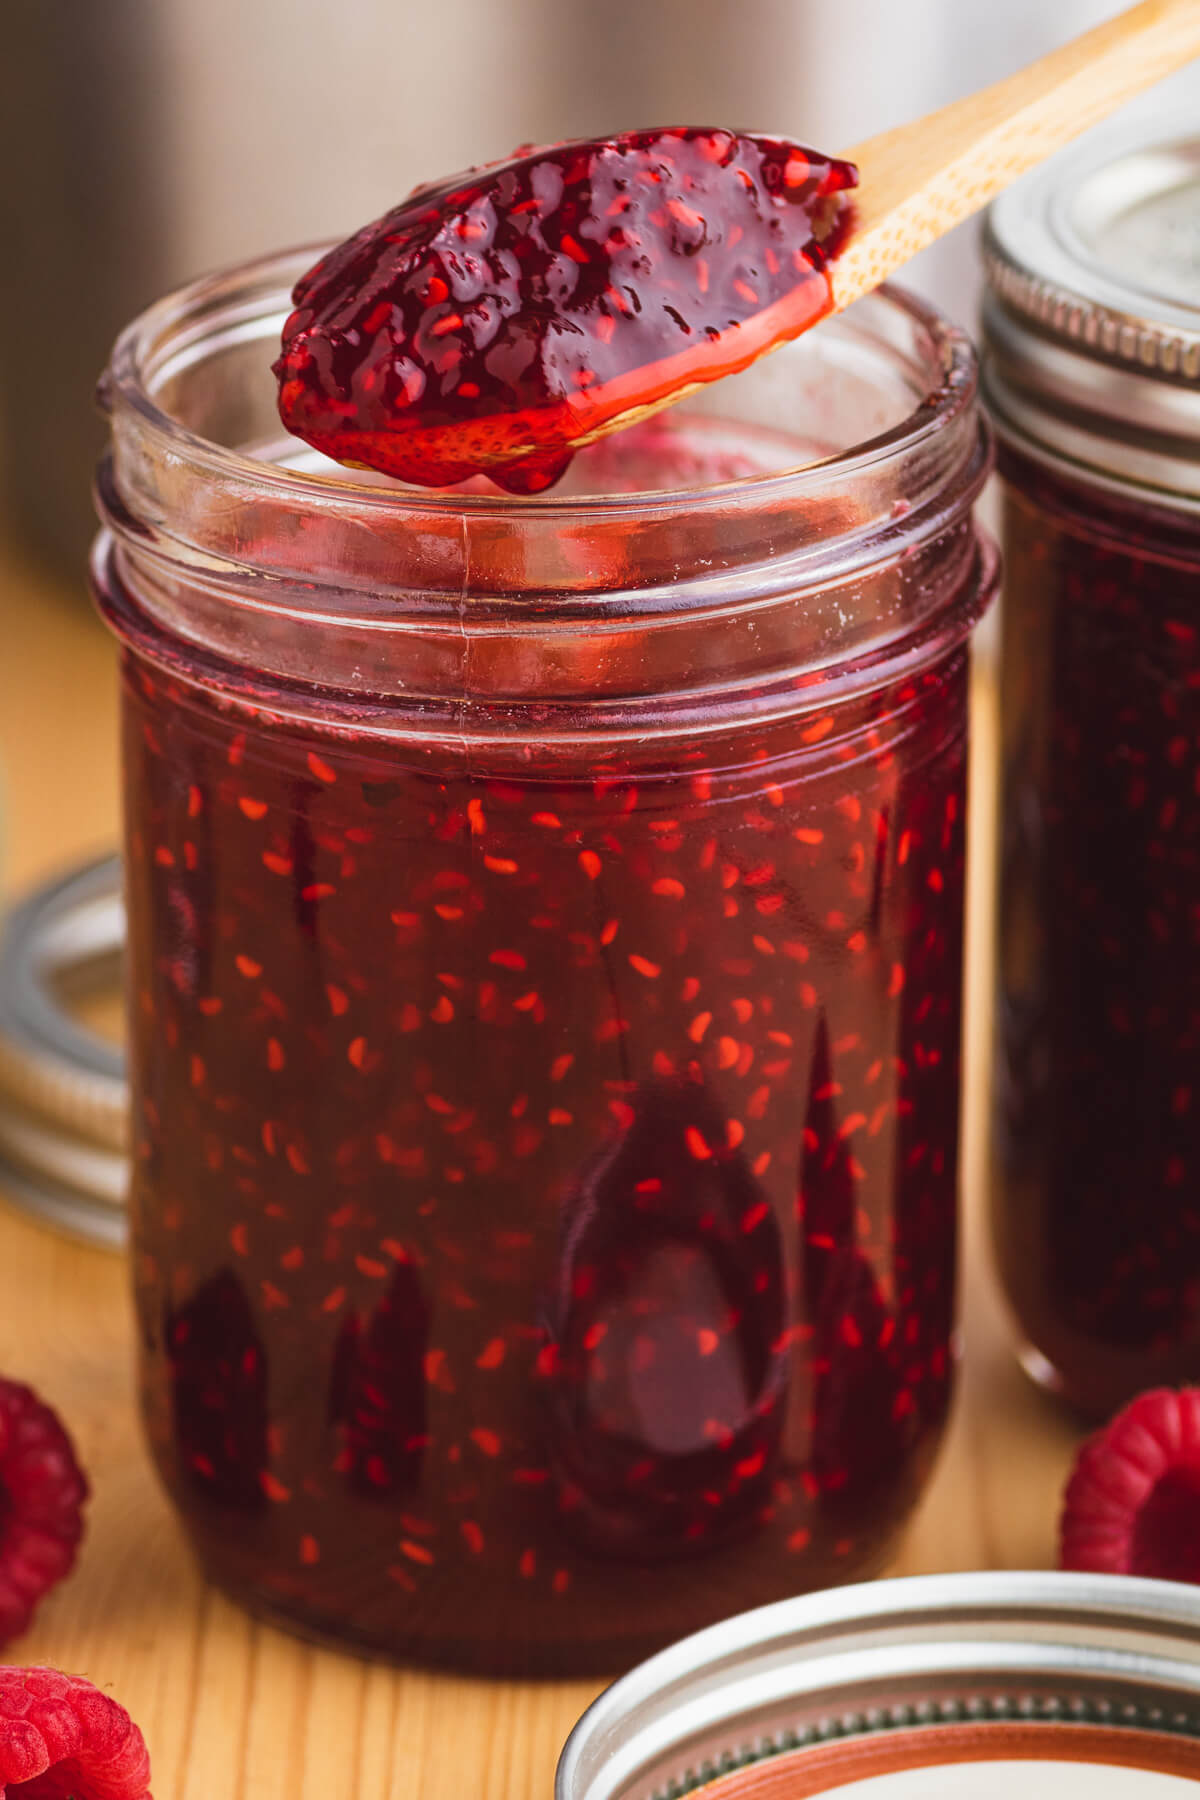 A wooden spoon holds a spoonful of raspberry jam over a jar of the same jam.